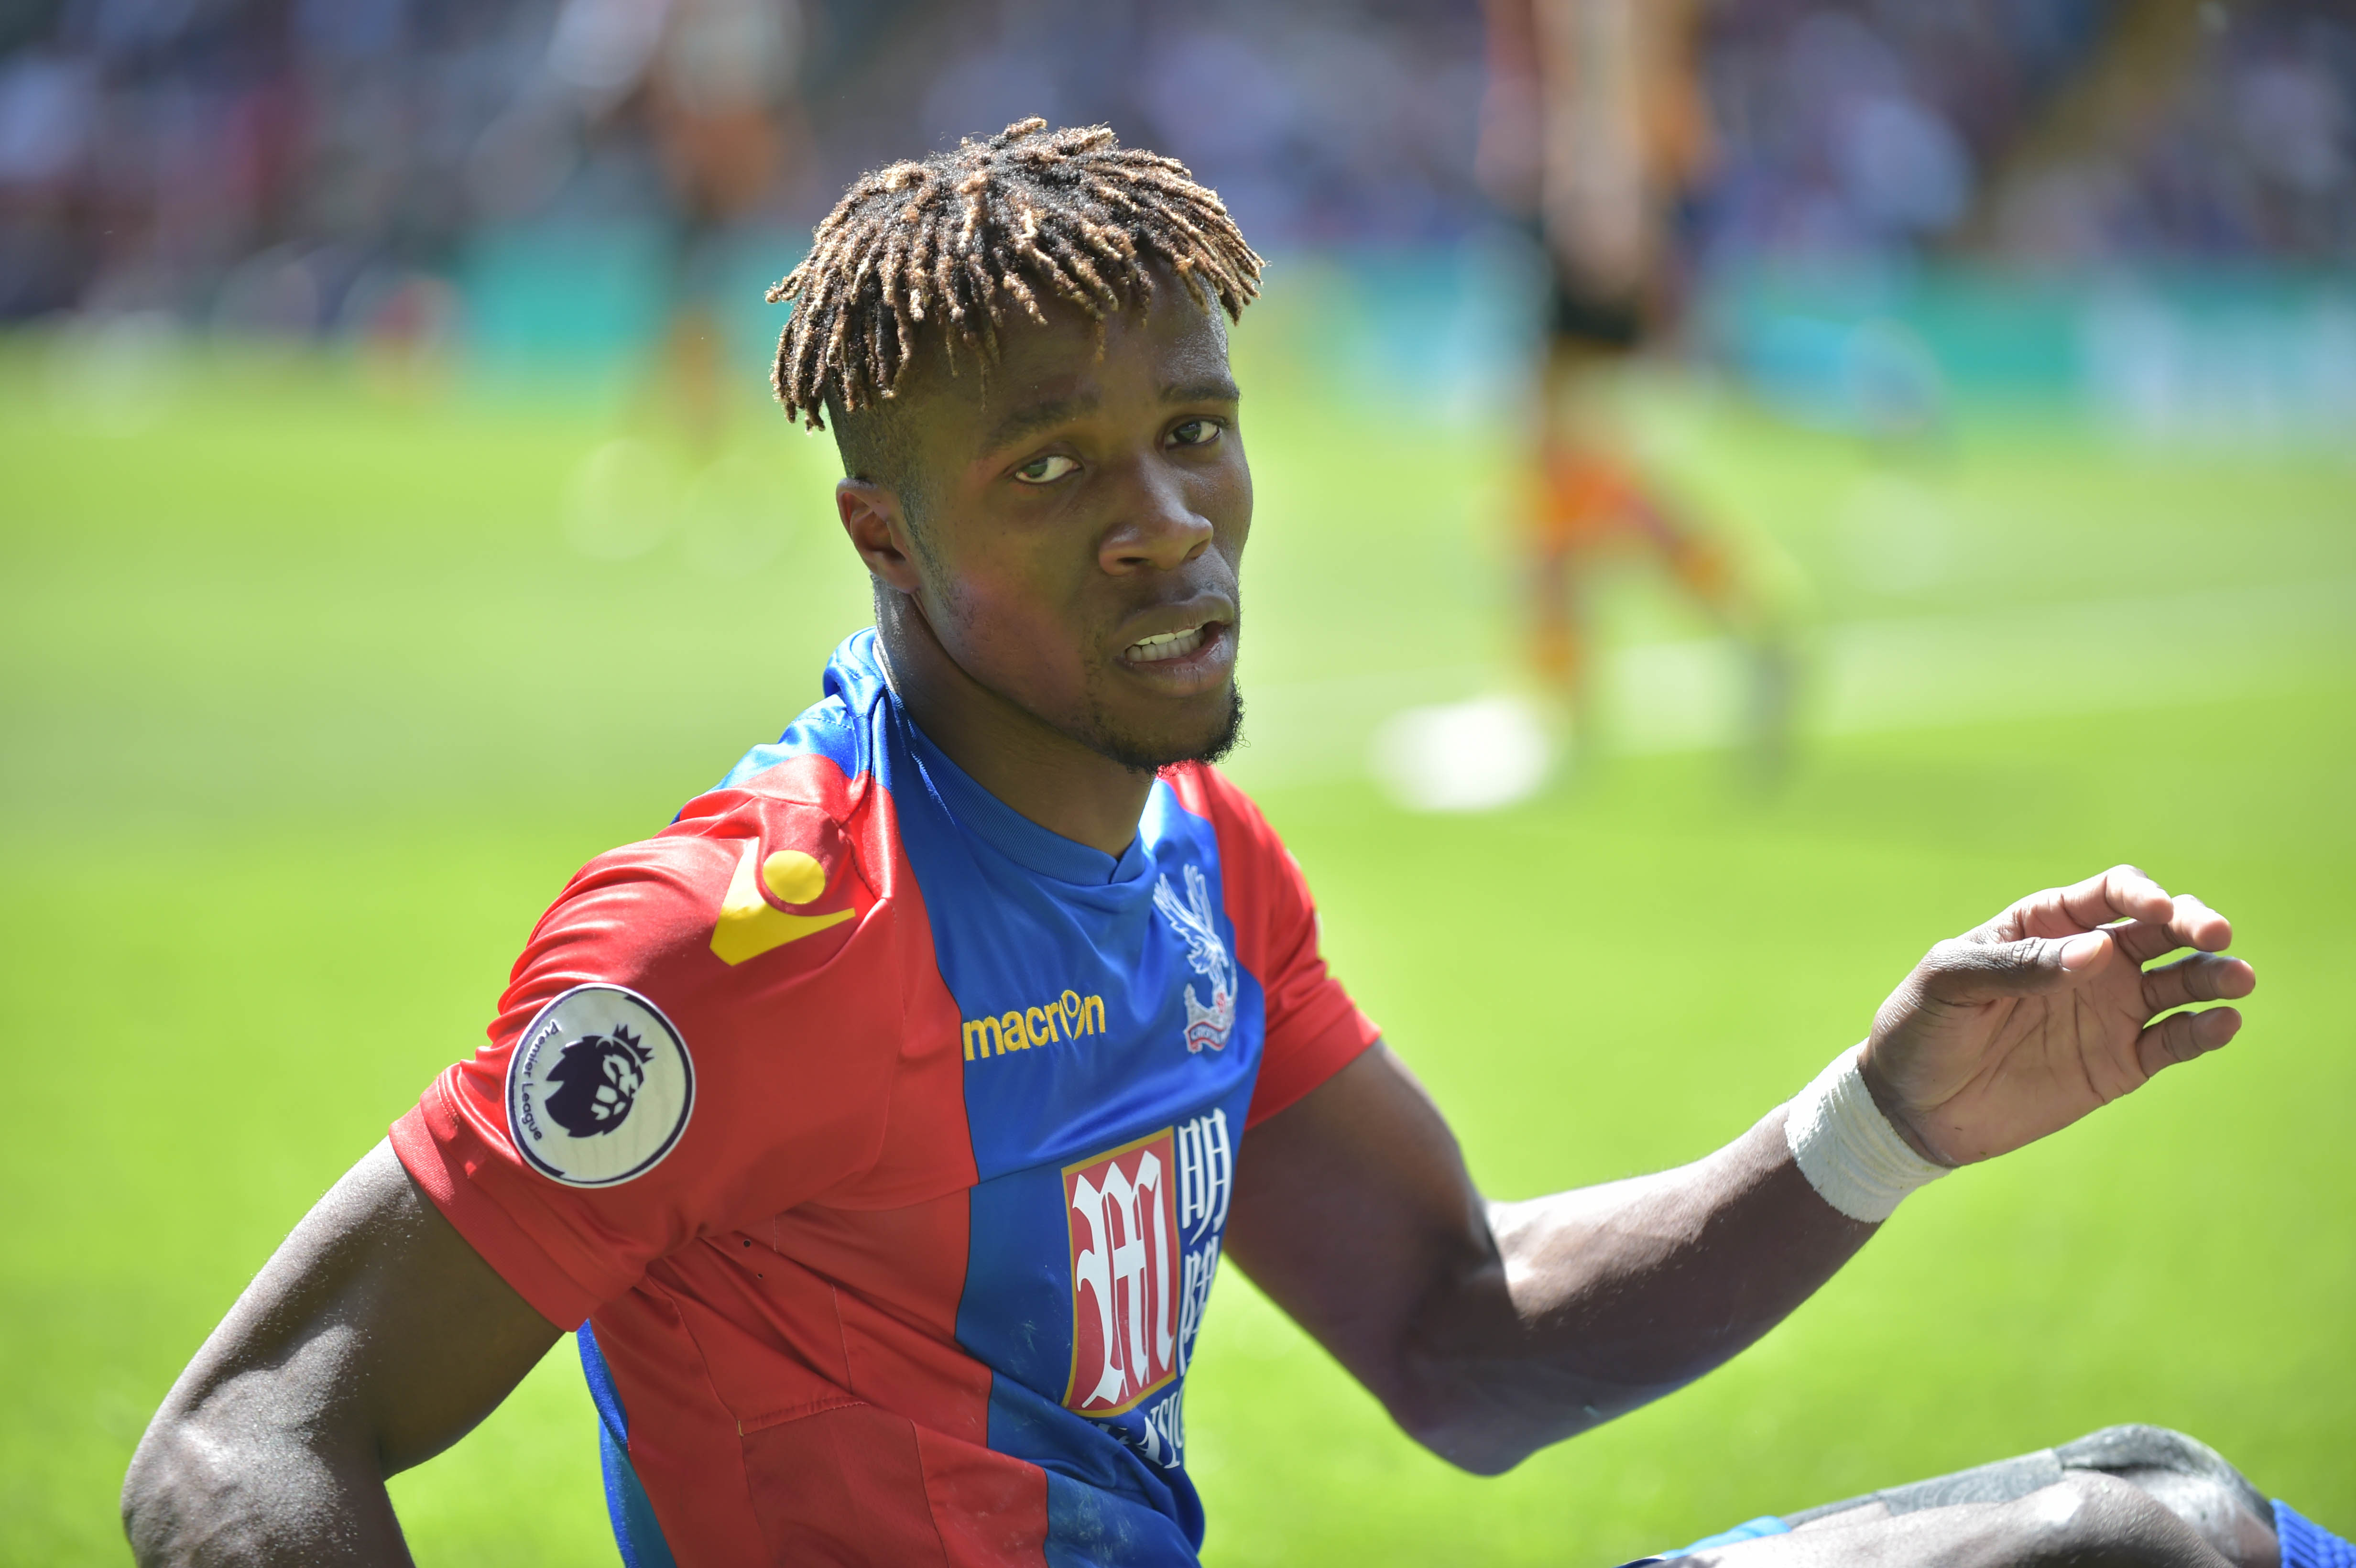 Crystal Palace's Ivorian striker Wilfried Zaha looks on during the English Premier League football match between Crystal Palace and Hull City at Selhurst Park in south London on May 14, 2017 / AFP PHOTO / OLLY GREENWOOD / RESTRICTED TO EDITORIAL USE. No use with unauthorized audio, video, data, fixture lists, club/league logos or 'live' services. Online in-match use limited to 75 images, no video emulation. No use in betting, games or single club/league/player publications.  /         (Photo credit should read OLLY GREENWOOD/AFP/Getty Images)